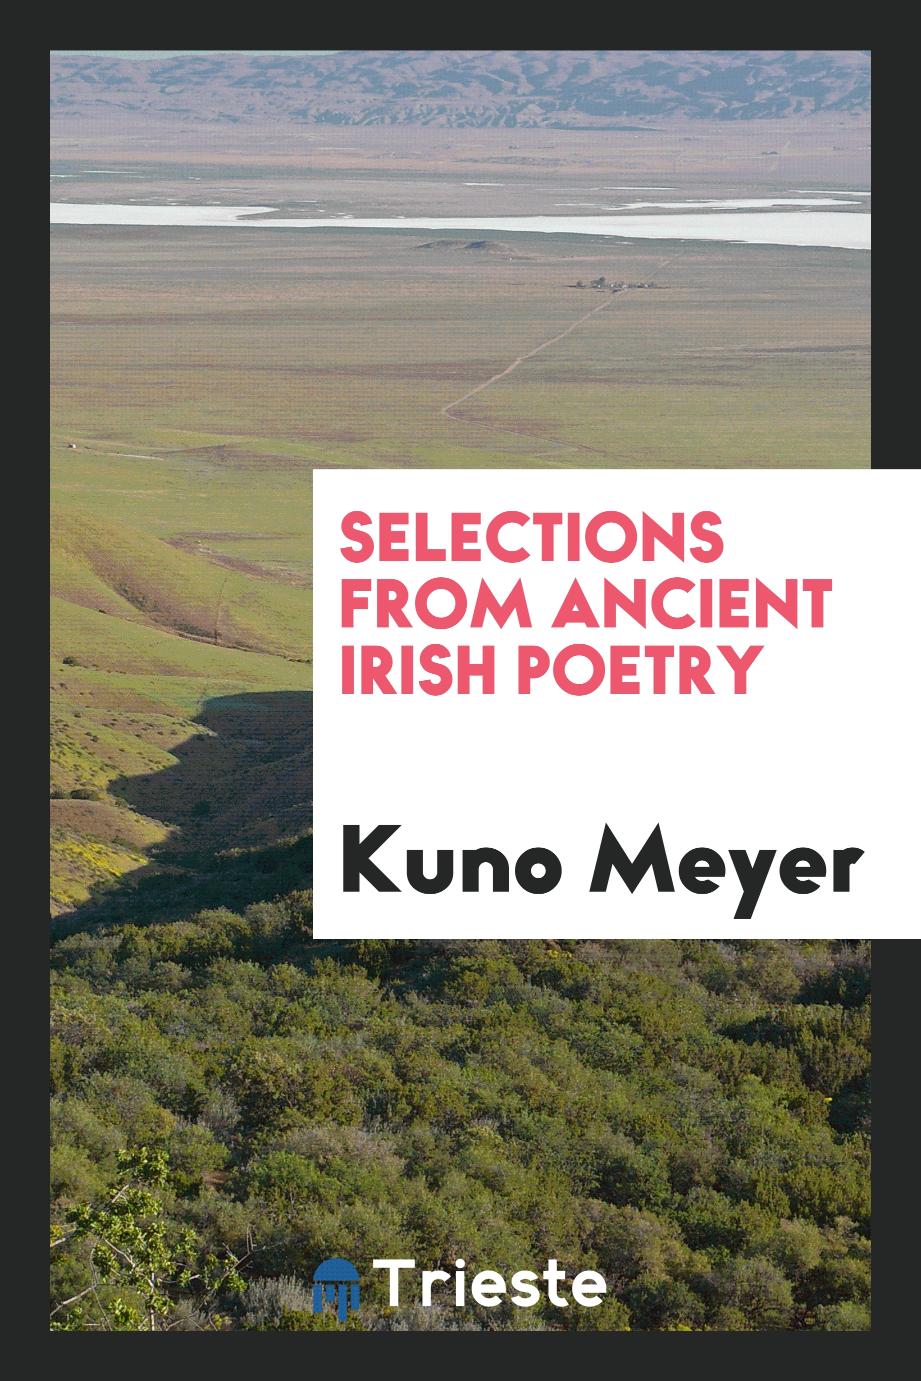 Selections from ancient Irish poetry